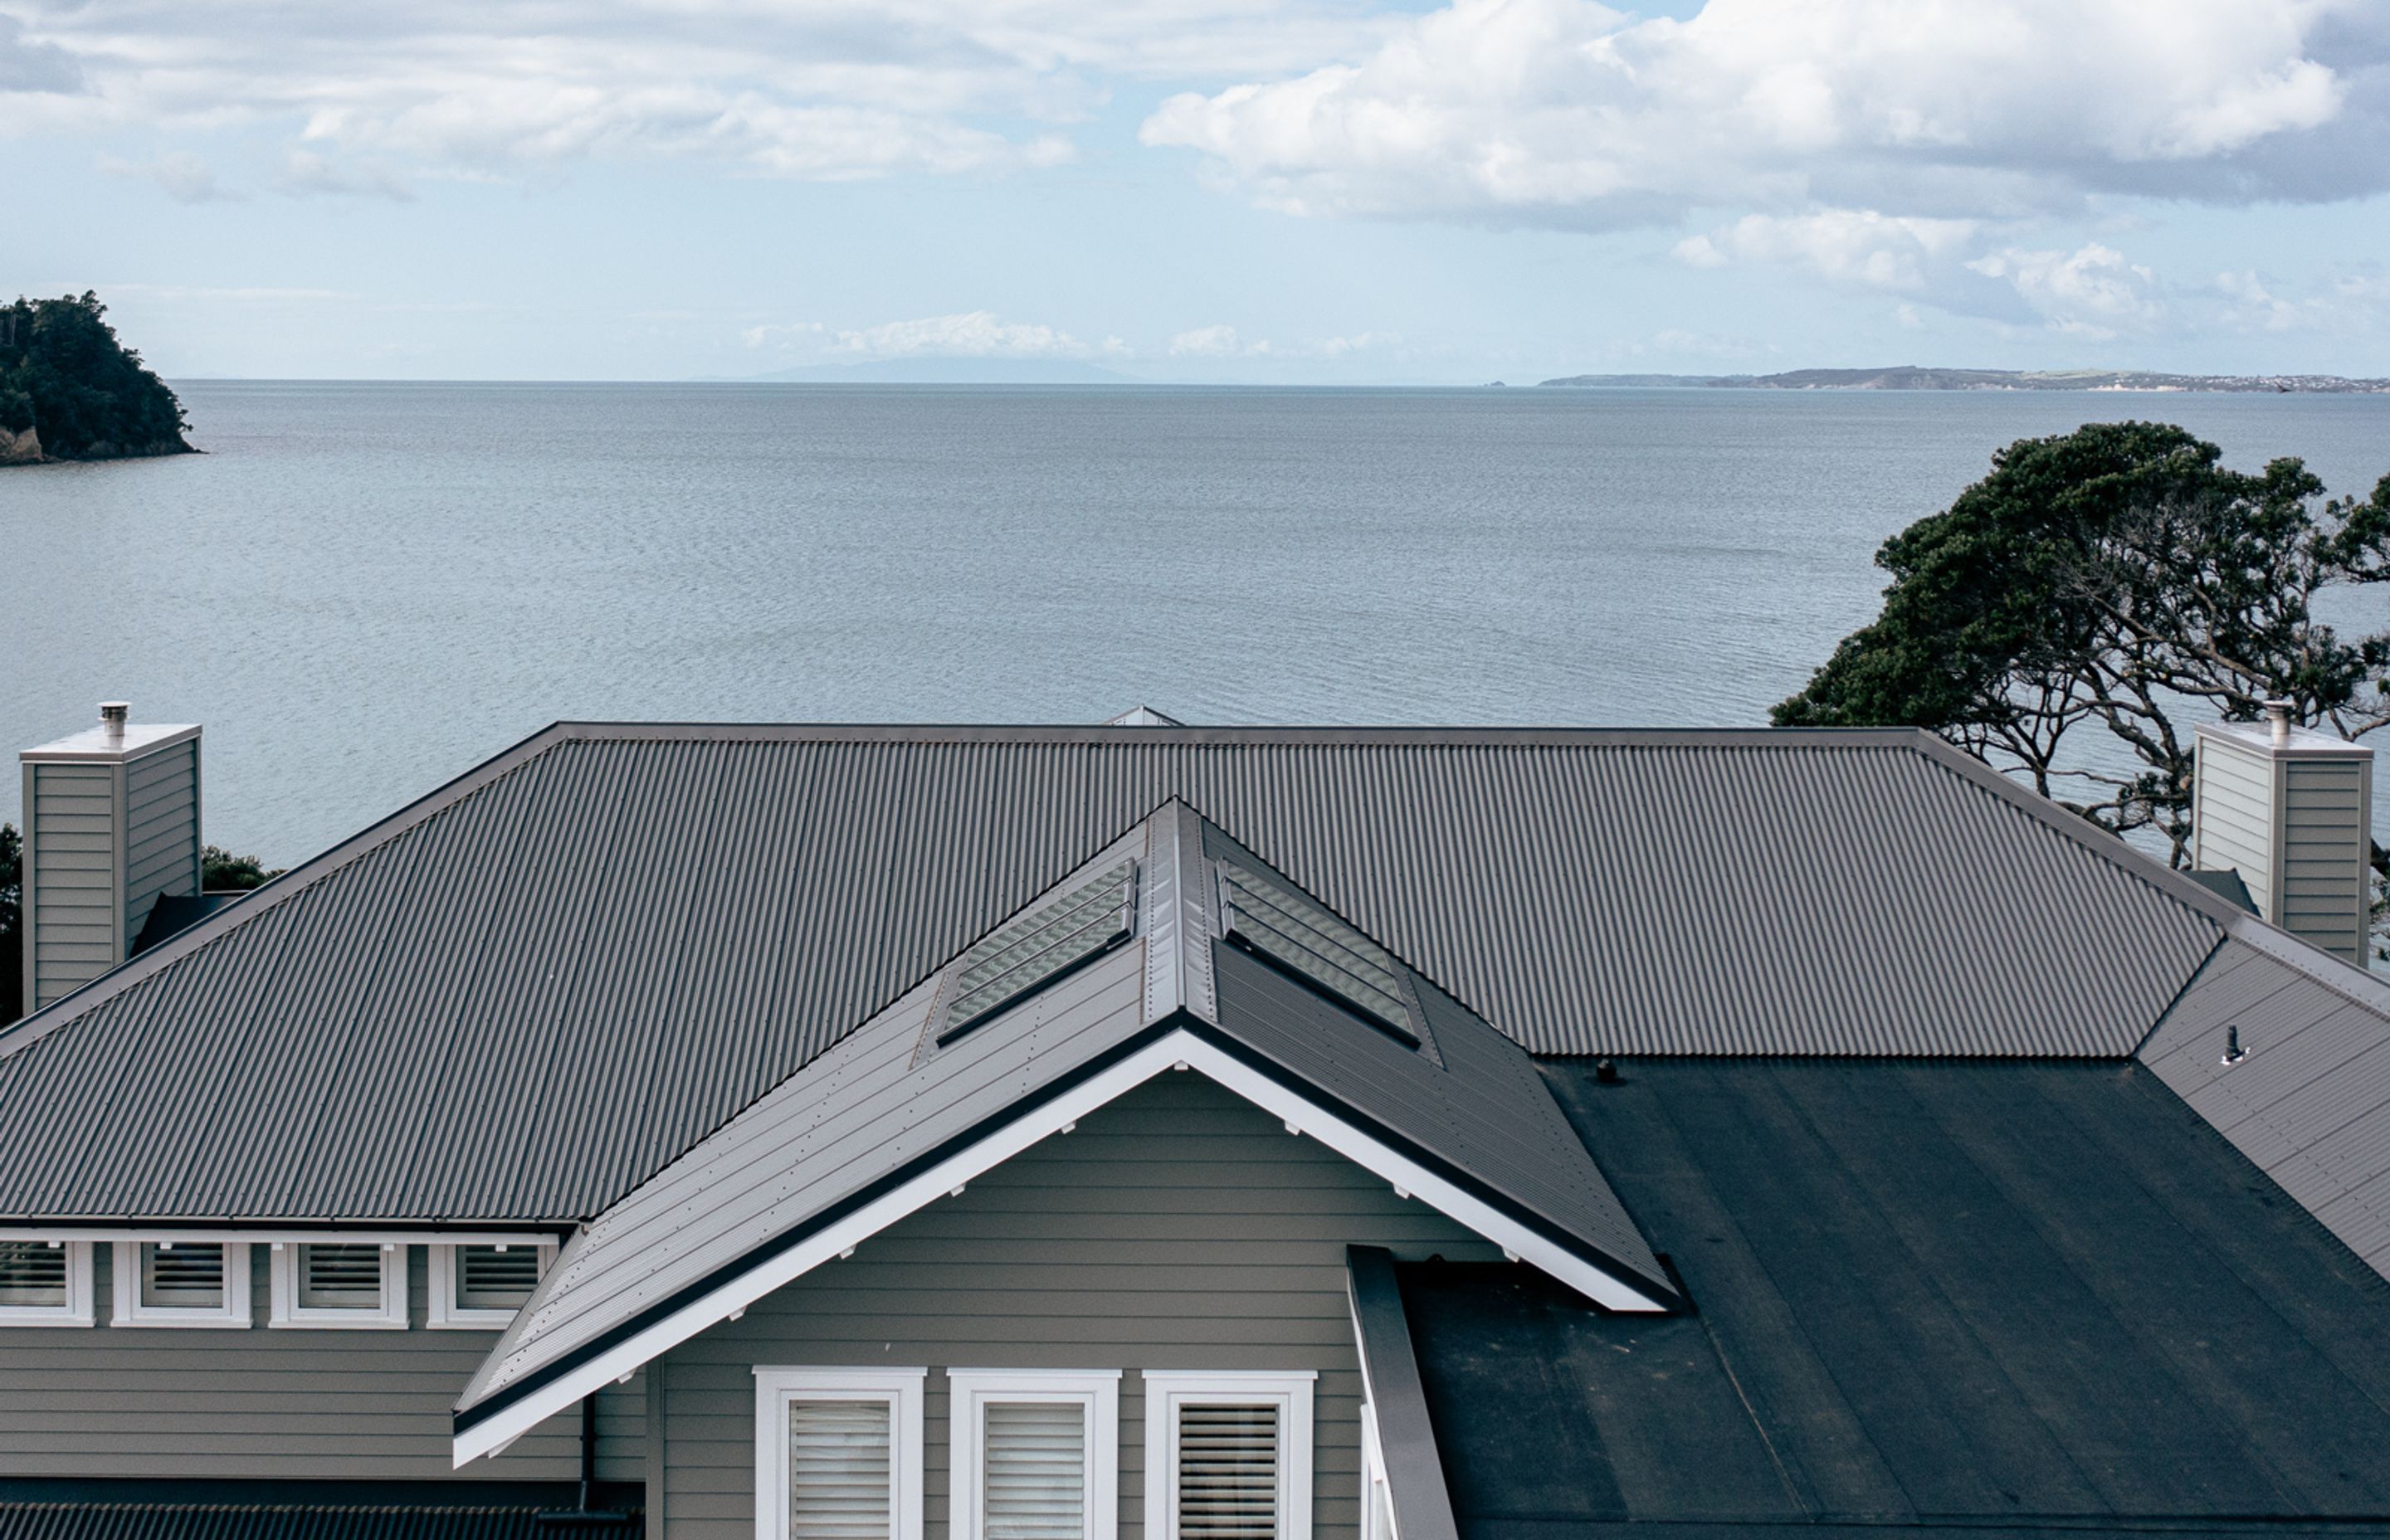 The classic hipped roof at the seaward-facing side of the home, becomes more complex at the back at the house. Zane Dykman says the "roof shout" was one of the first big milestones of the project.